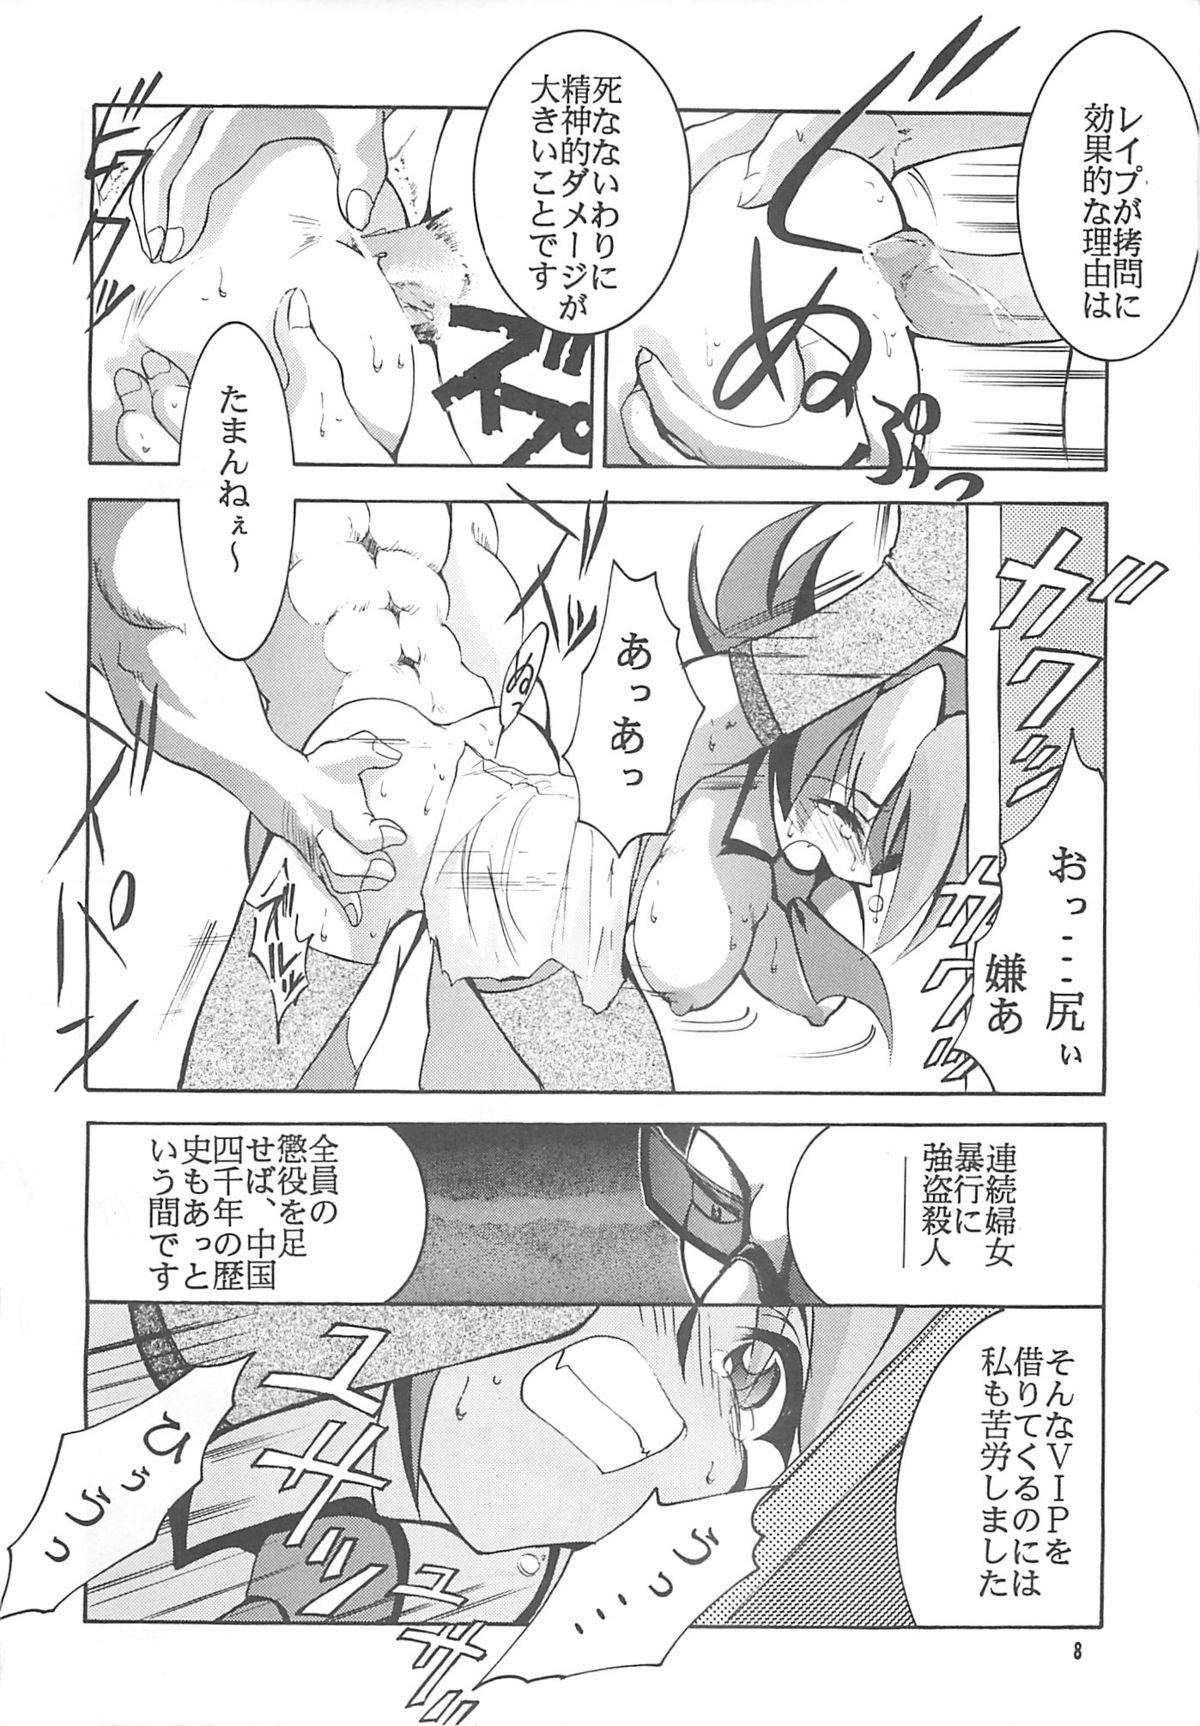 Eating Pussy TEN - Slayers Saber marionette Betterman Gays - Page 7